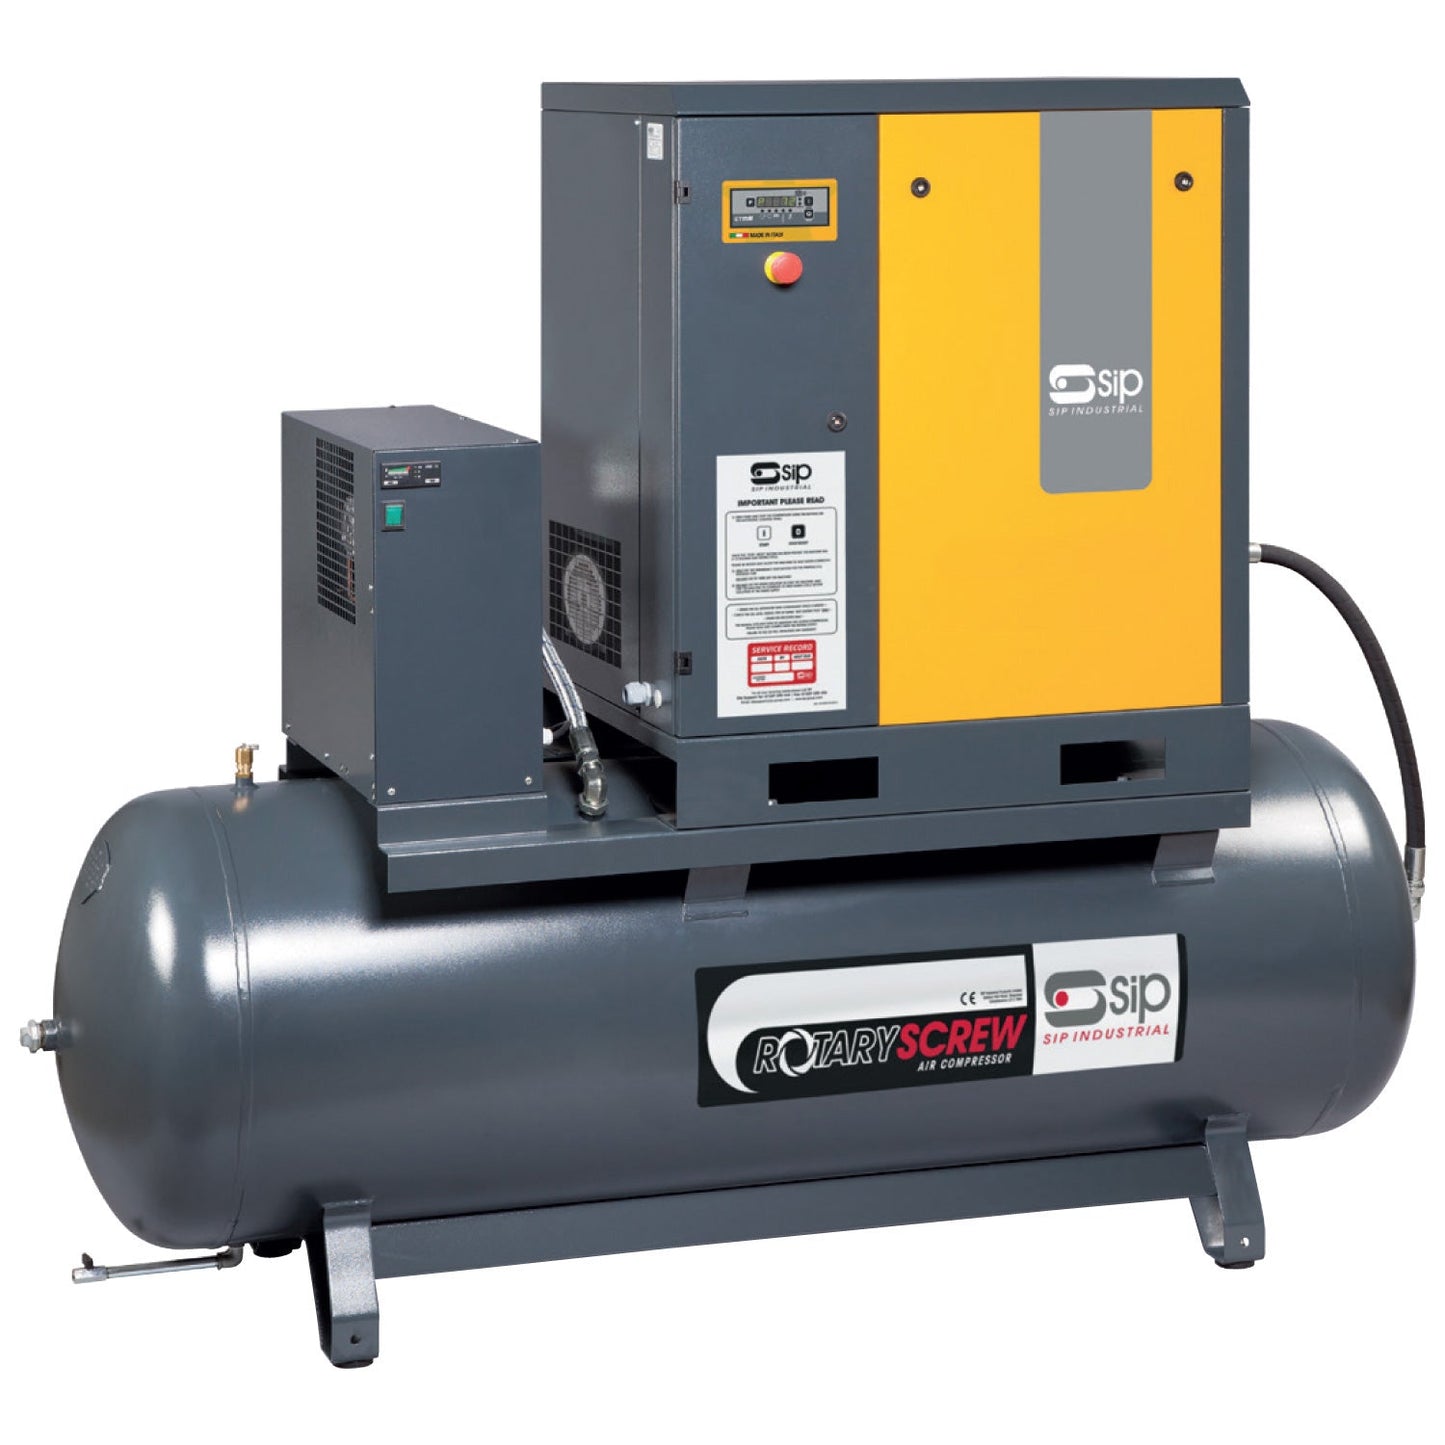 SIP RS08-10-270BD/RD 270ltr Rotary Screw Compressor with Dryer, Sip Industrial